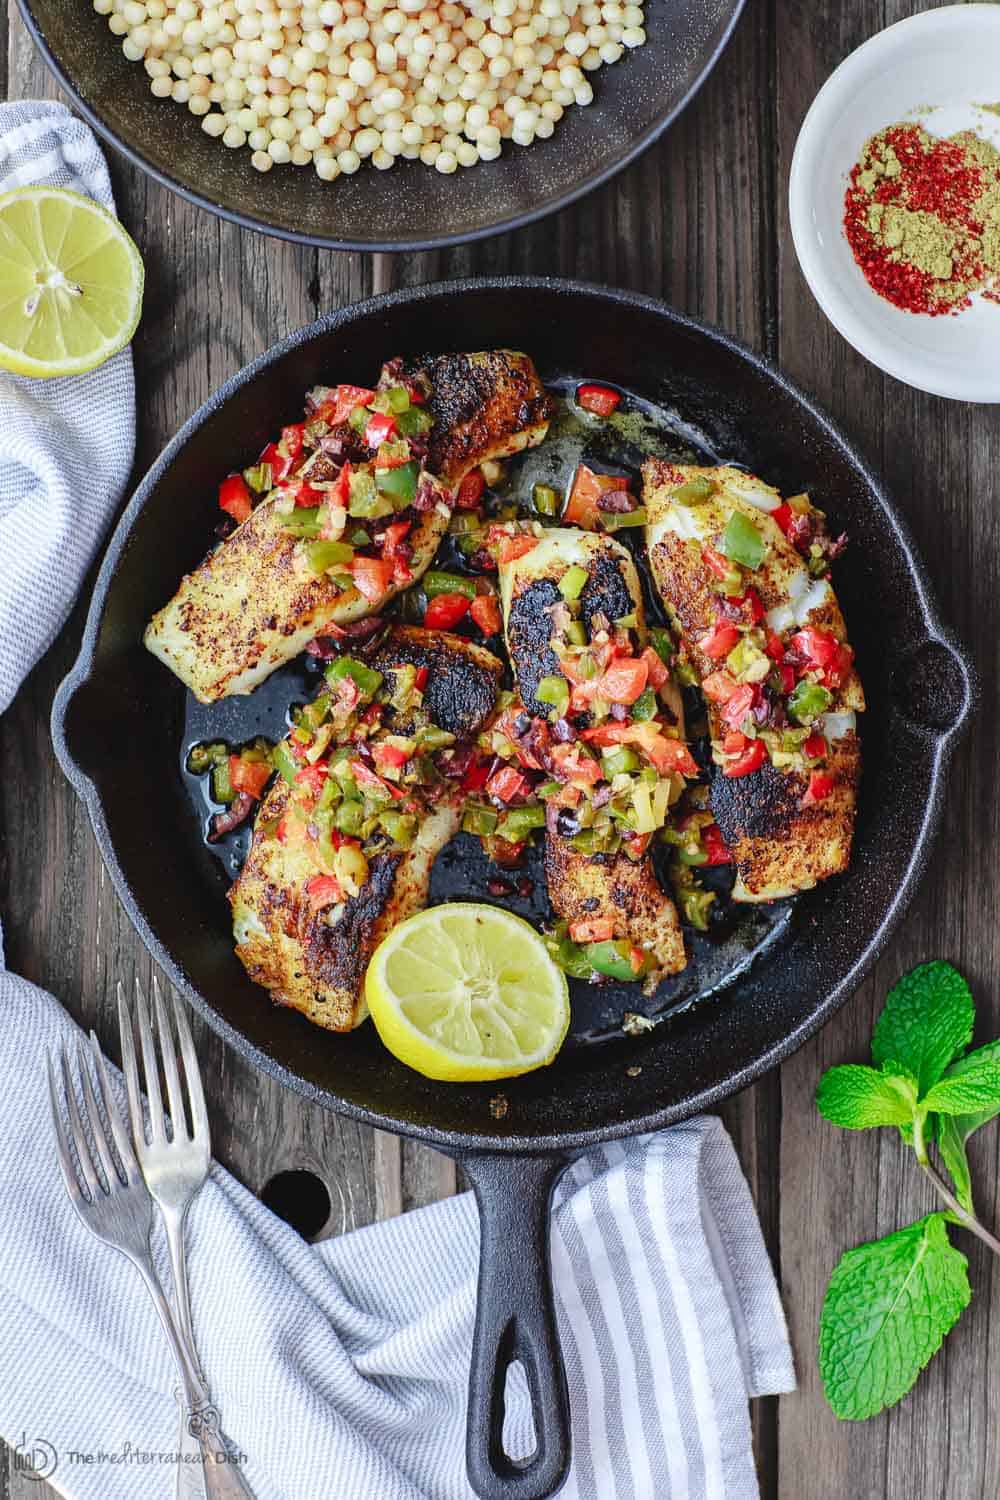 Mediterranean Pan Seared Sea Bass Recipe | The Mediterranean Dish. Quick and crispy pan seared sea bass, coated with Mediterranean spices and a tasty bell pepper medley to serve on top or as a side! Dinner in minutes! from TheMediterraneanDish.com #mediterraneandiet #mediterraneanrecipes #seafoodrecipes #fish #fishrecipes #healthyrecipes #lowcarbrecipes #weeknightdinner #weeknightmeal #onpotdinner #onepan #glutenfreerecipes #seabass #easyrecipes